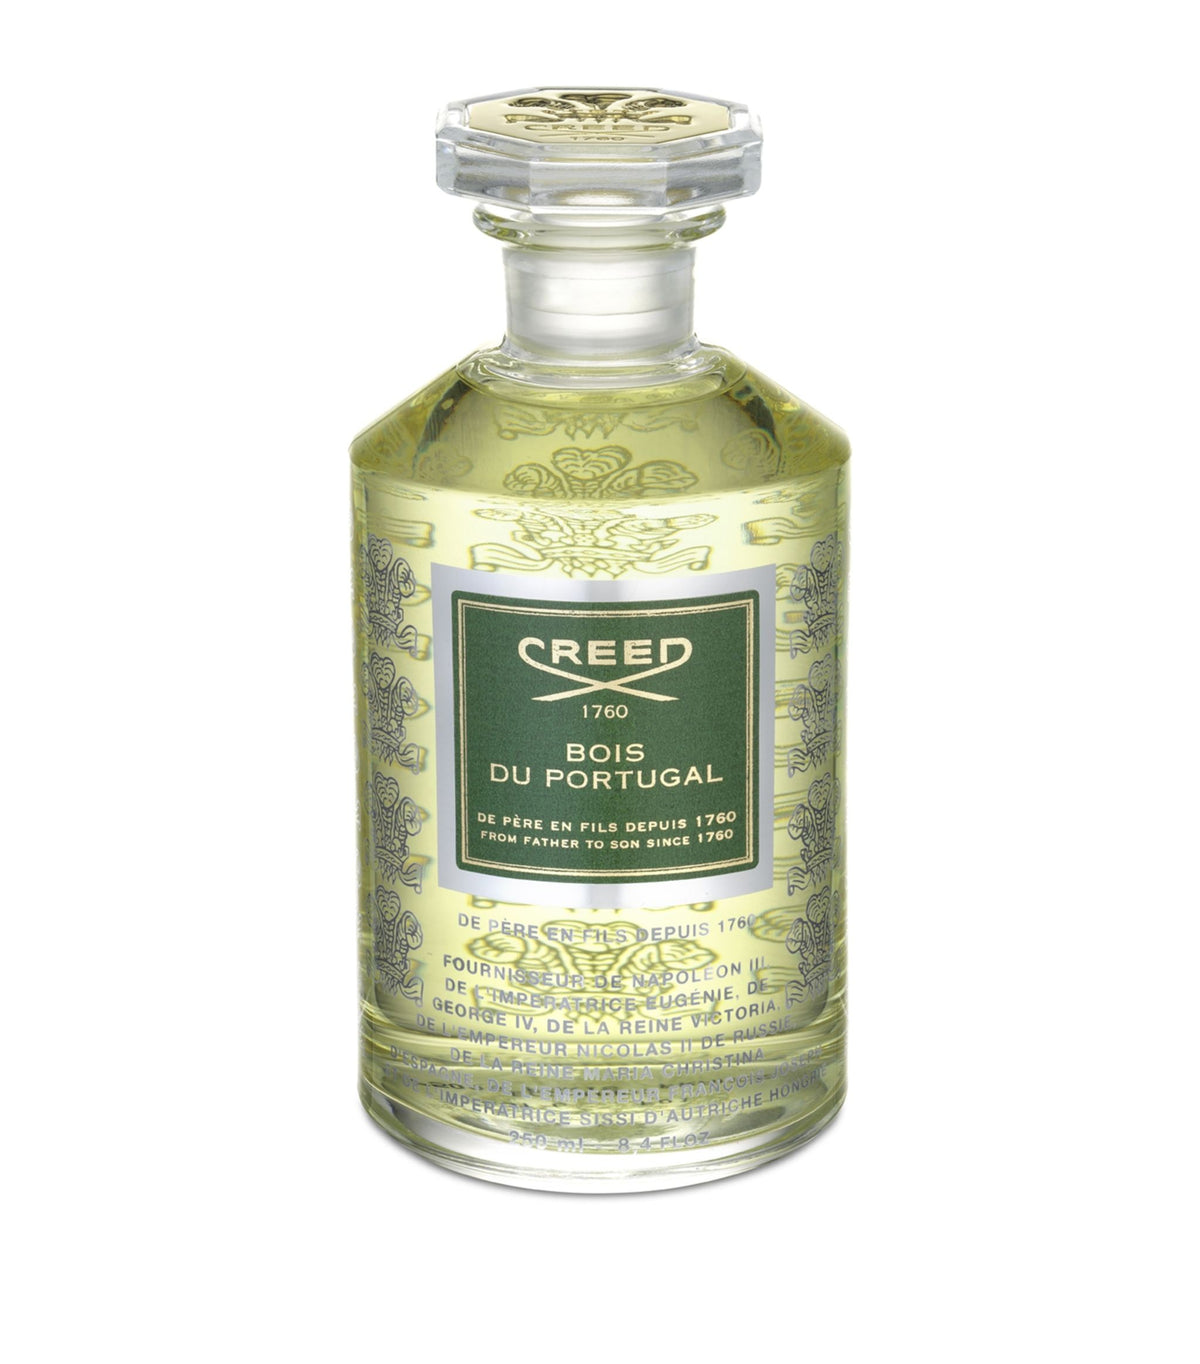 Creed -Holz aus Portugal 250 ml